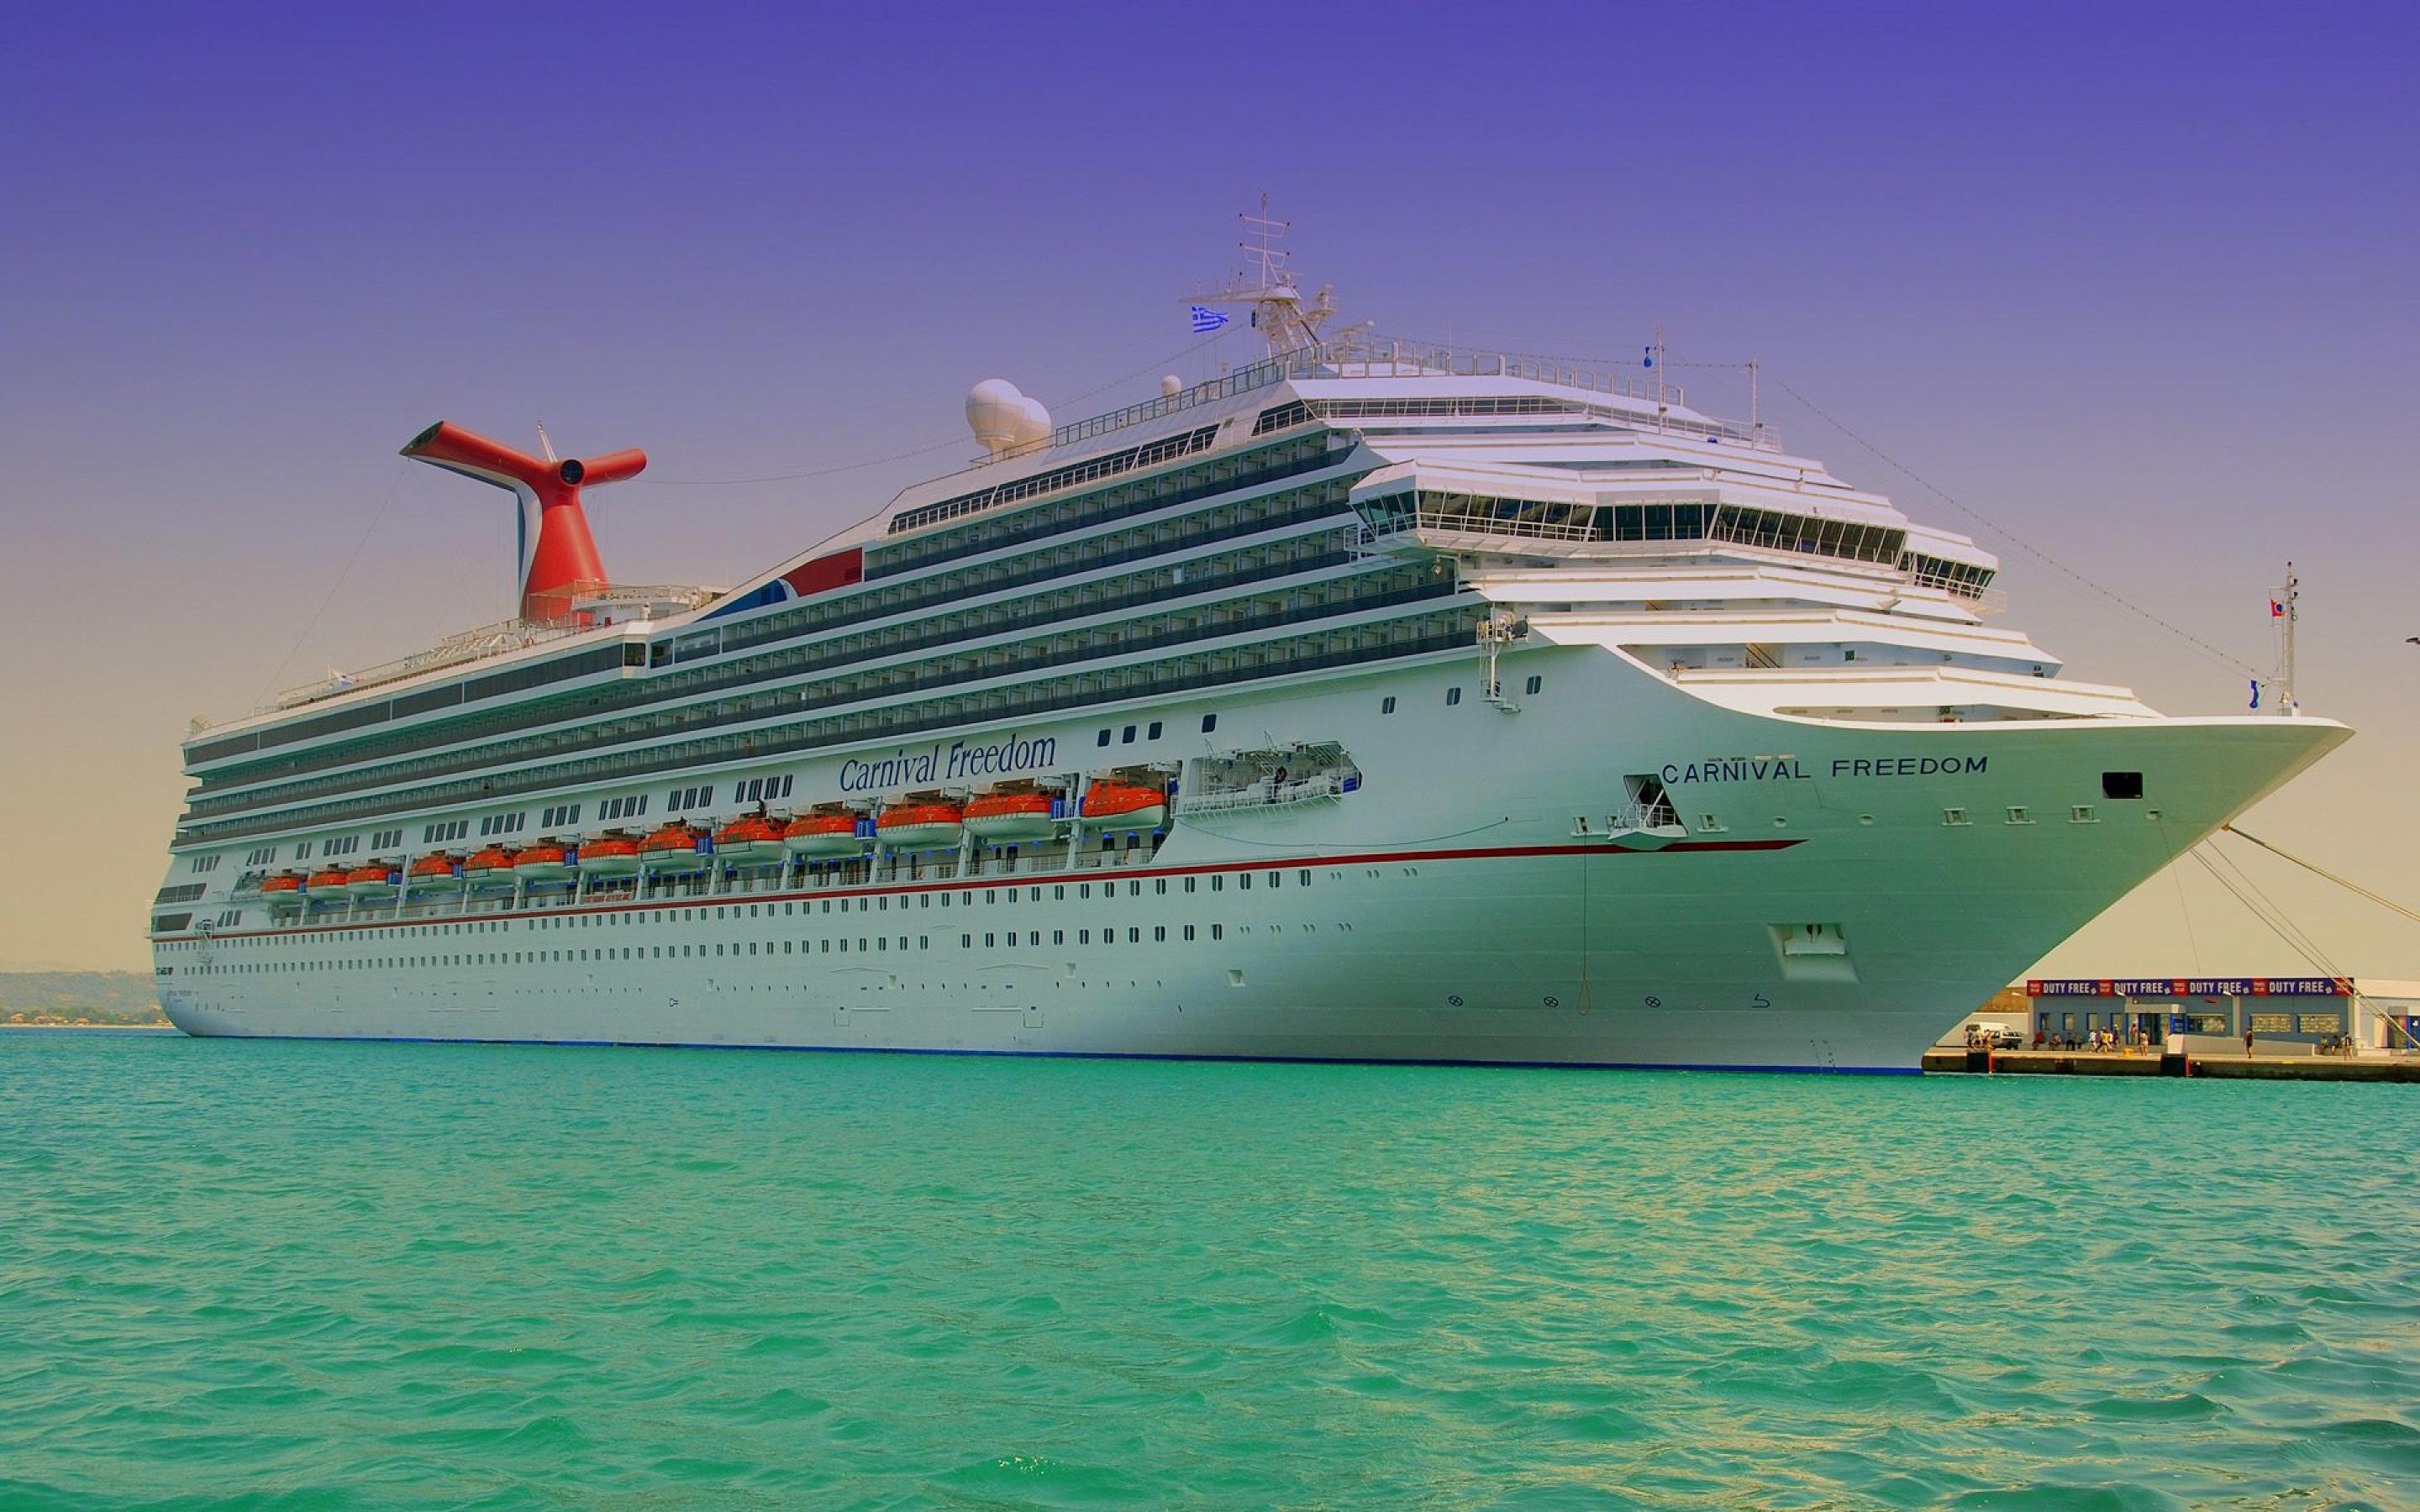  September 18 2015 By Stephen Comments Off on Cruise Ship Wallpapers 2880x1800